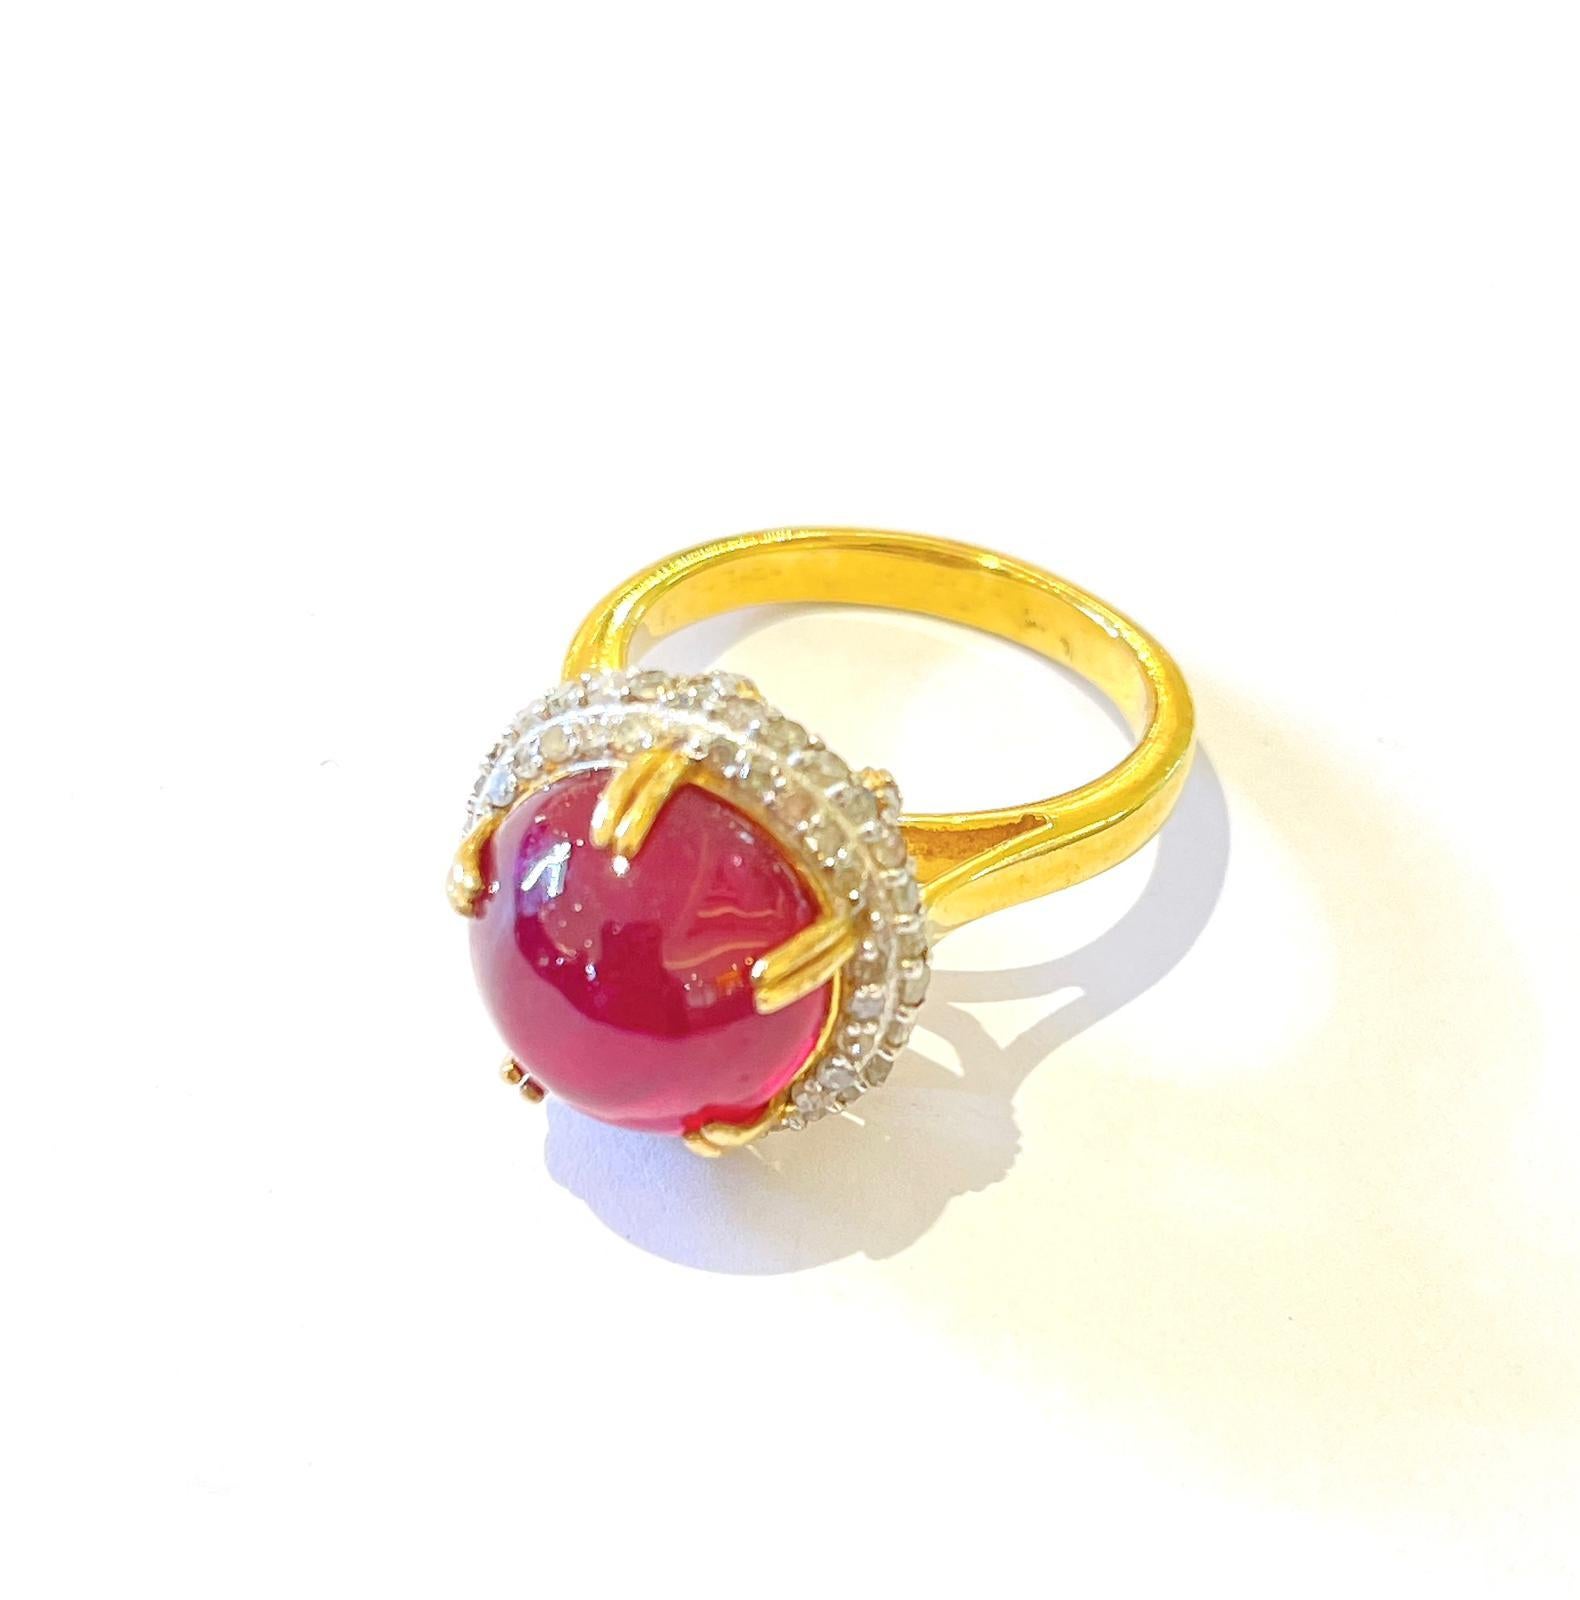 Bochic “Capri” Red Ruby & Diamond Cocktail Ring Set In 18K Gold & Silver  In New Condition For Sale In New York, NY